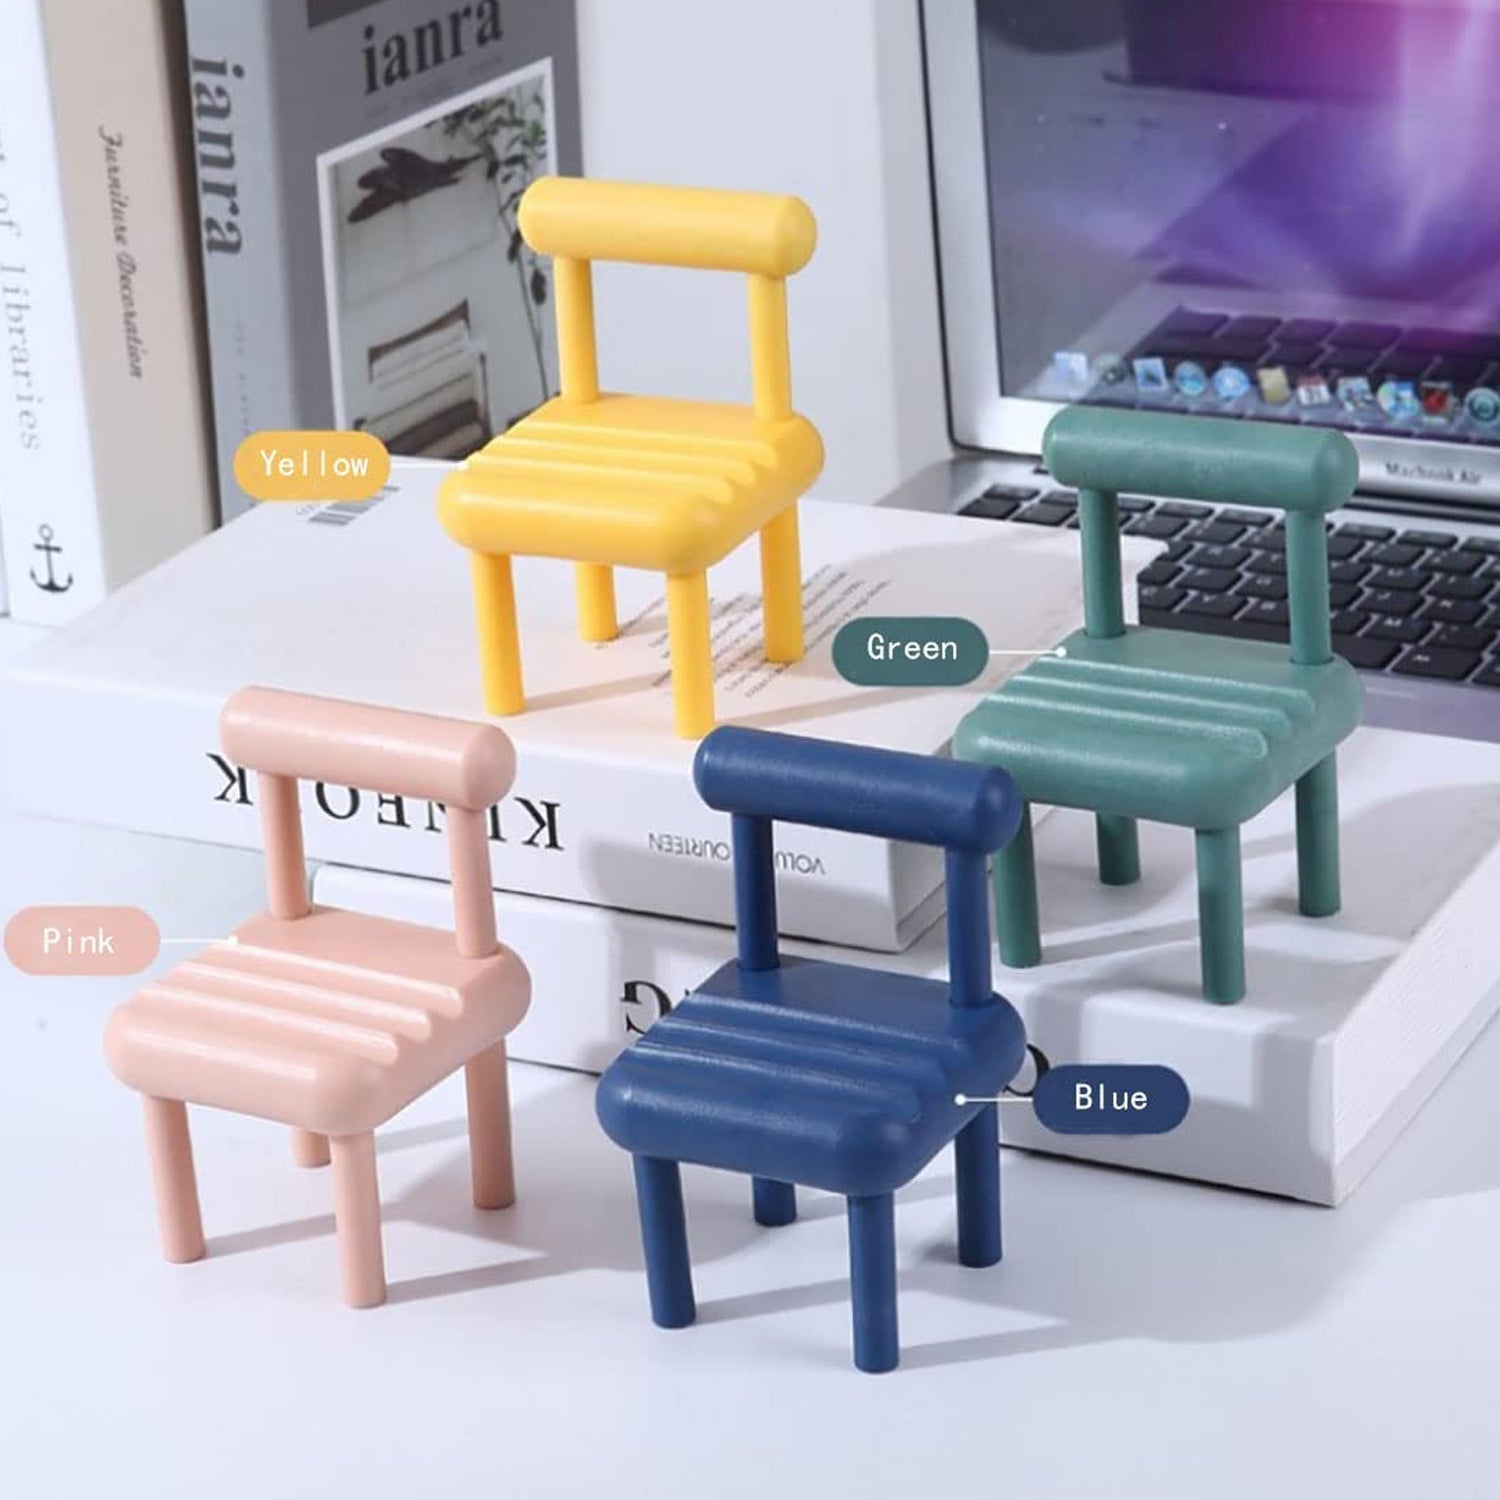 8854 Mobile Phone Holder, Mini Chair Cell Phone Stand, Portable Smartphone Dock, Cellphone Holder for Desktop Design Compatible with All Mobile Phones (1 Pc)